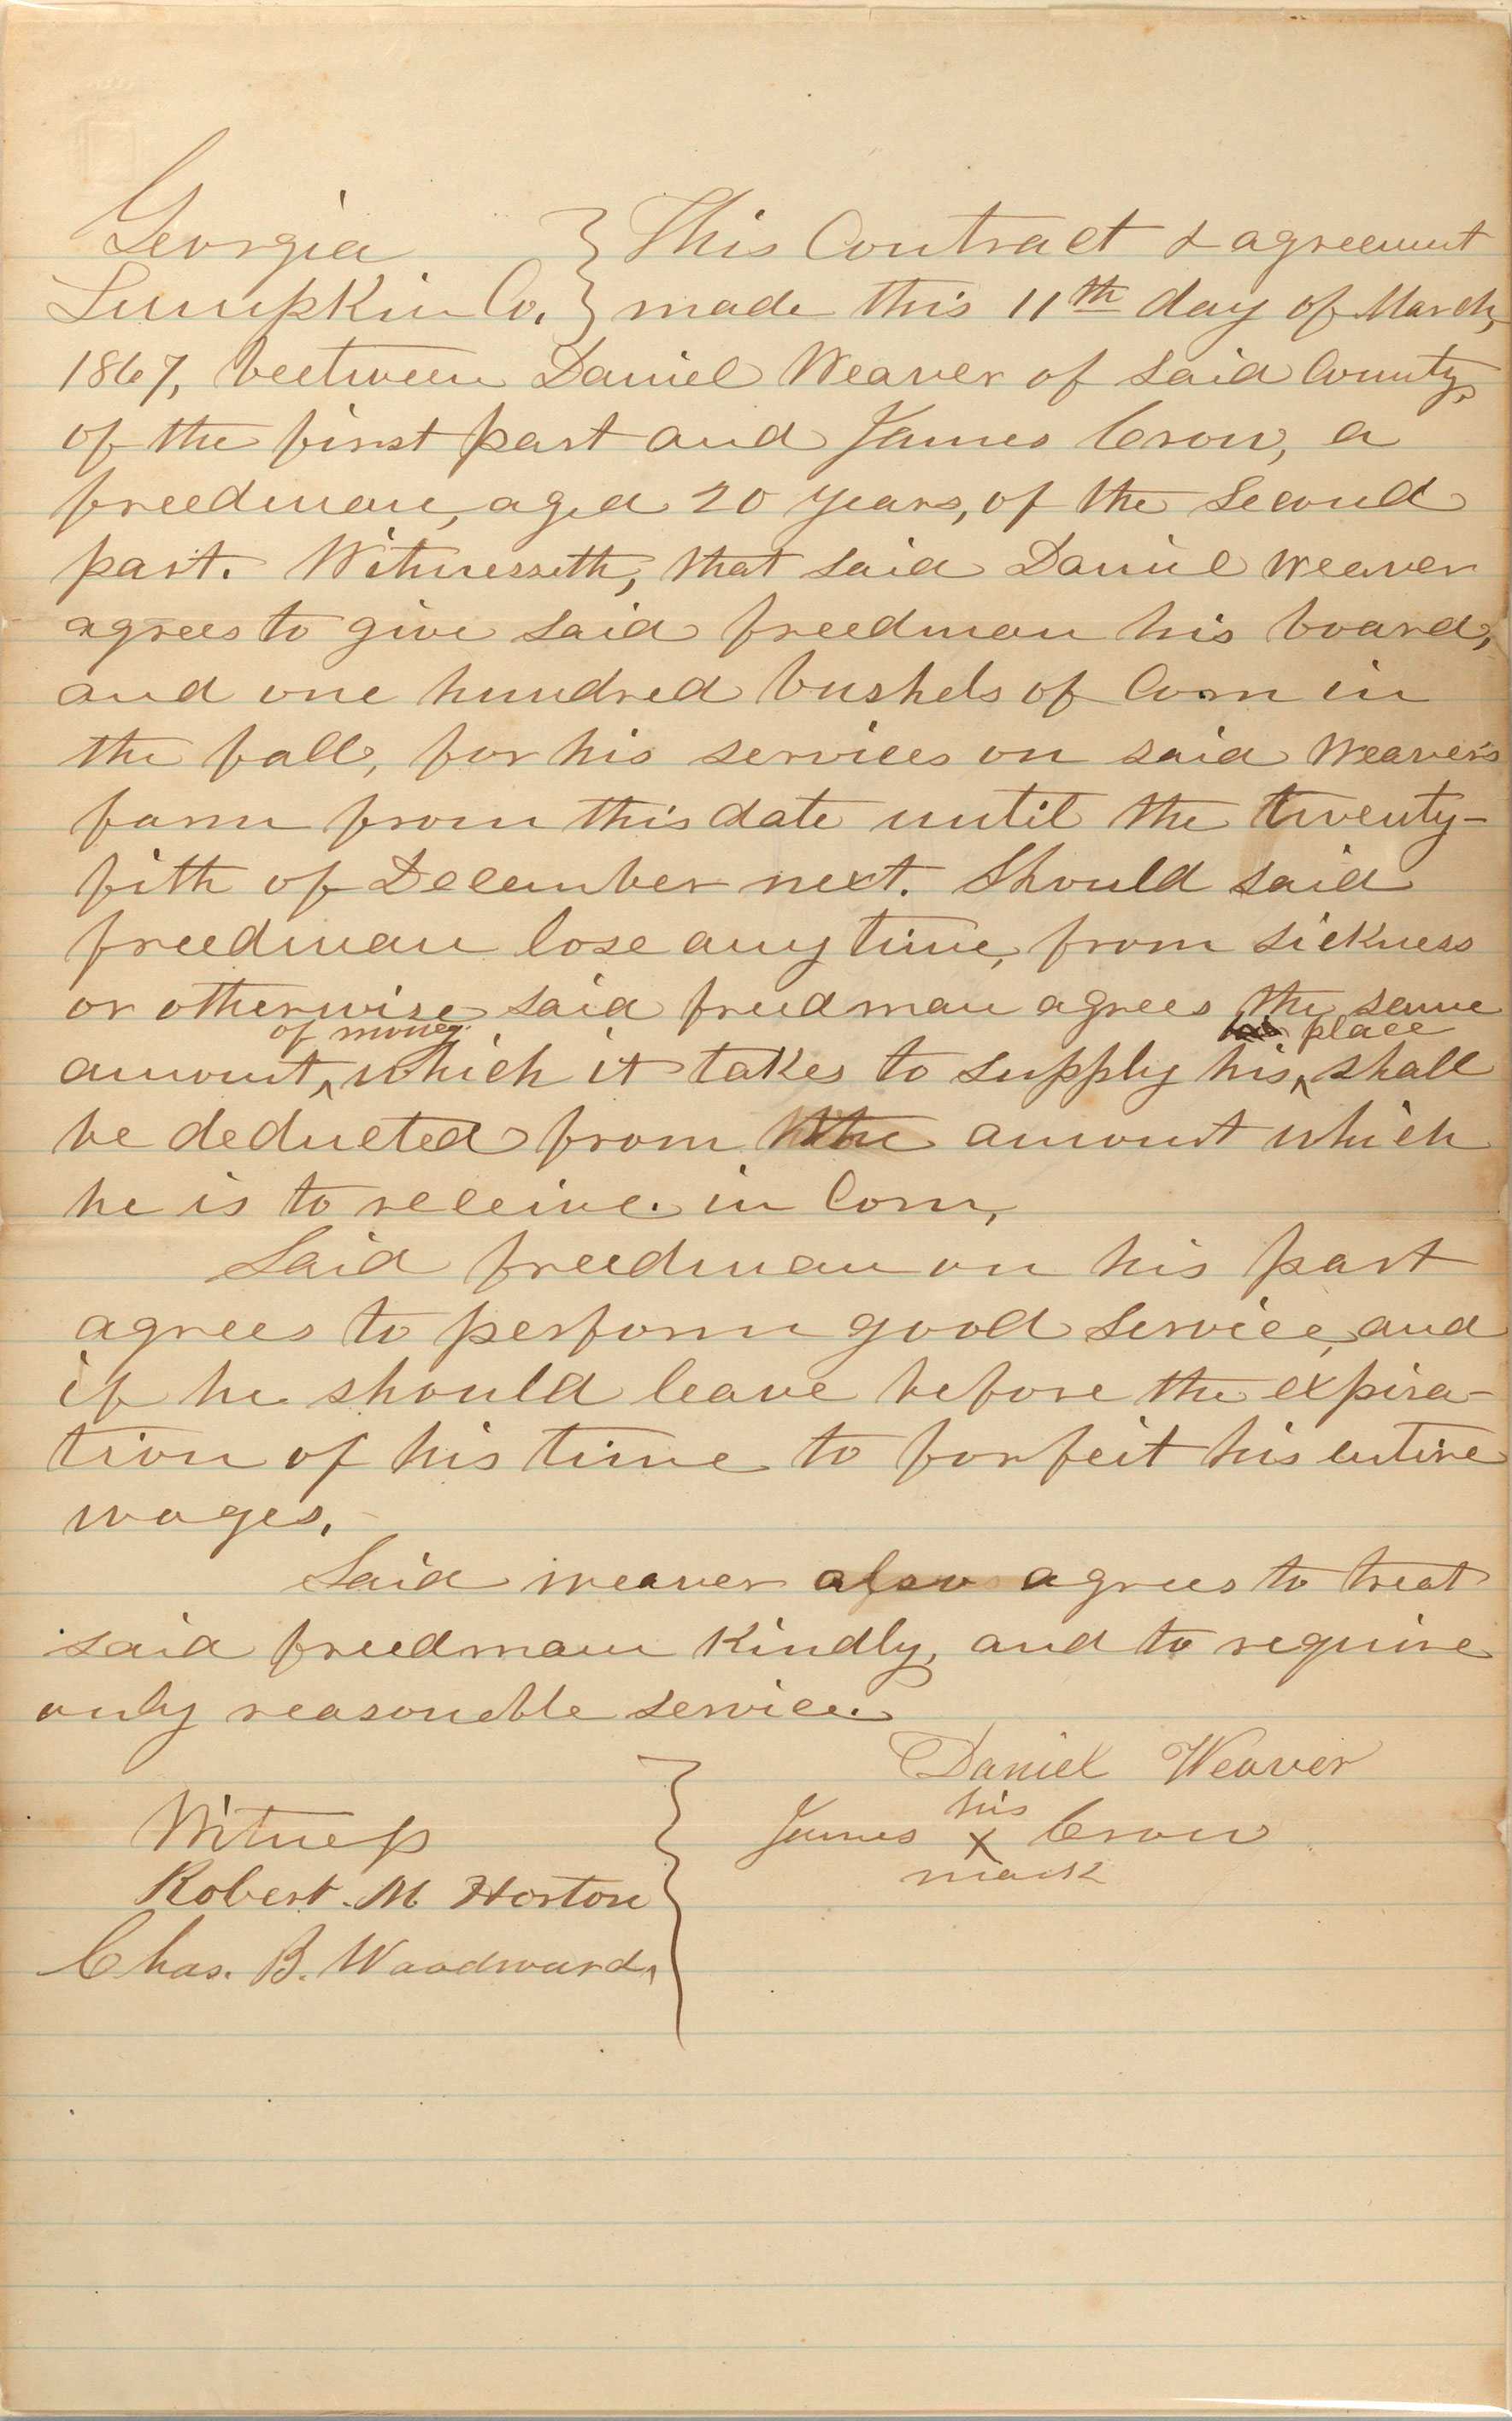 Handwritten labor agreement signed by Daniel Weaver and freedman James Crow.